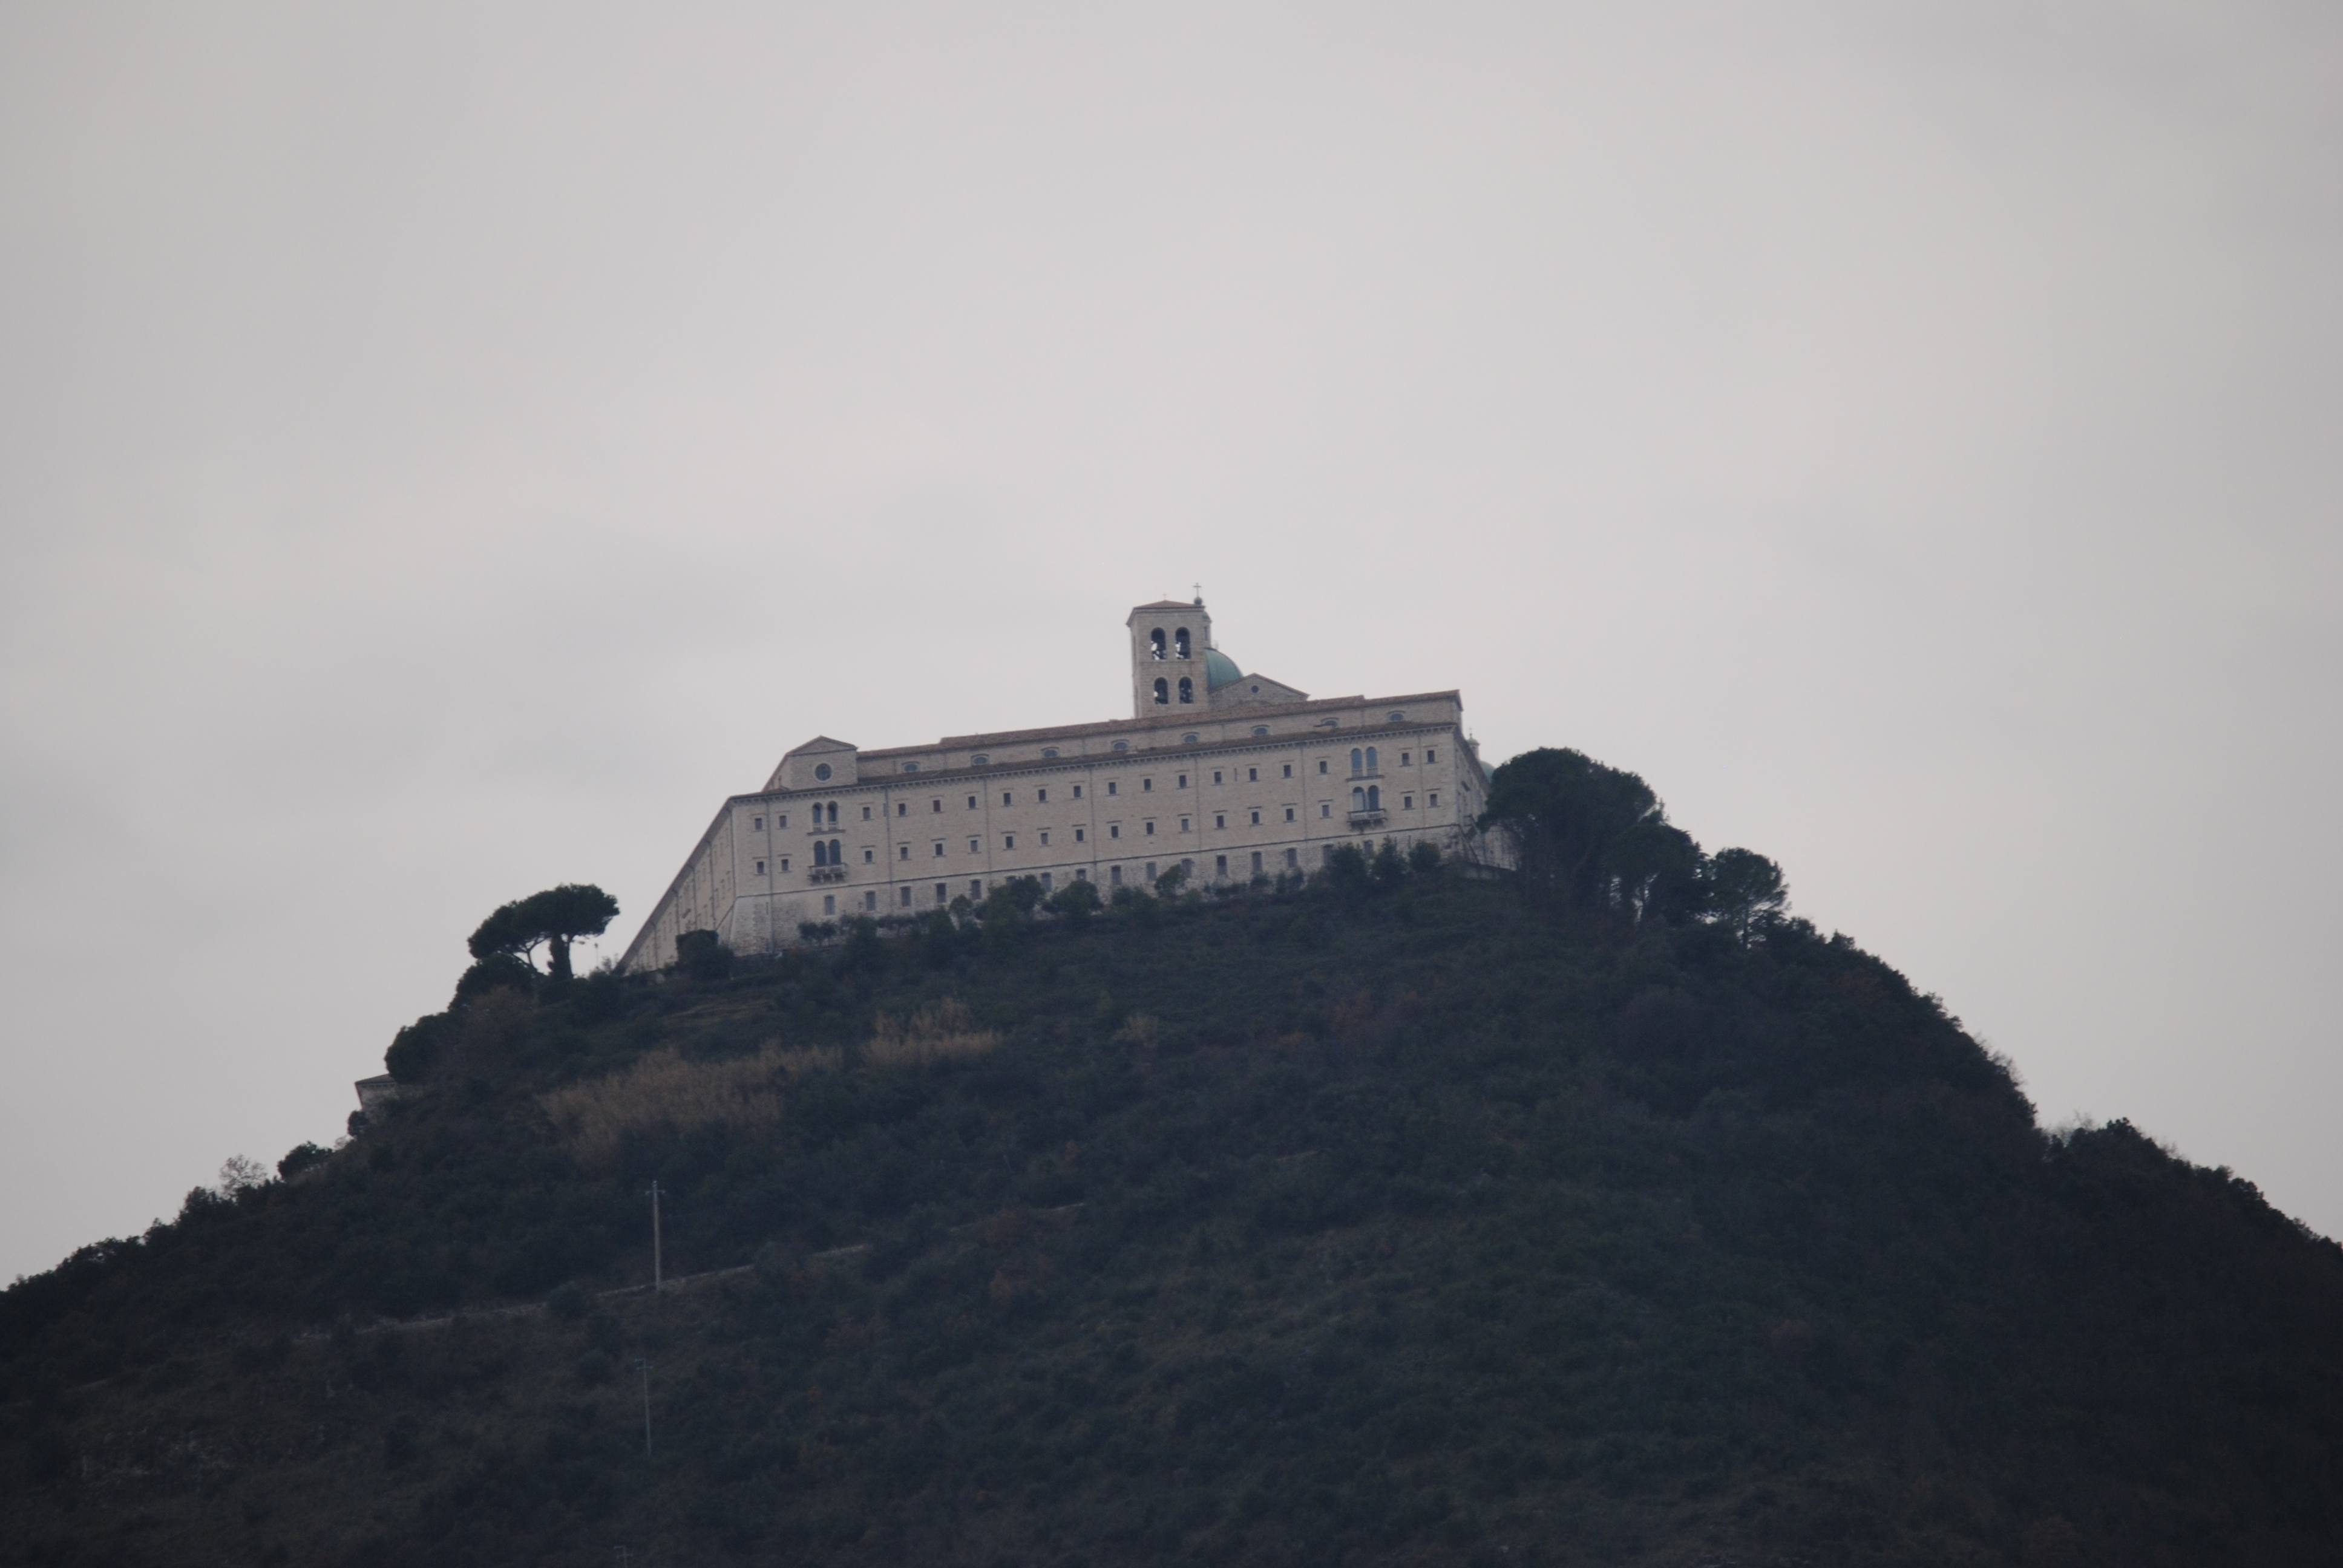 MonteCassino. The Americans blew this up at some point but they've rebuilt it.